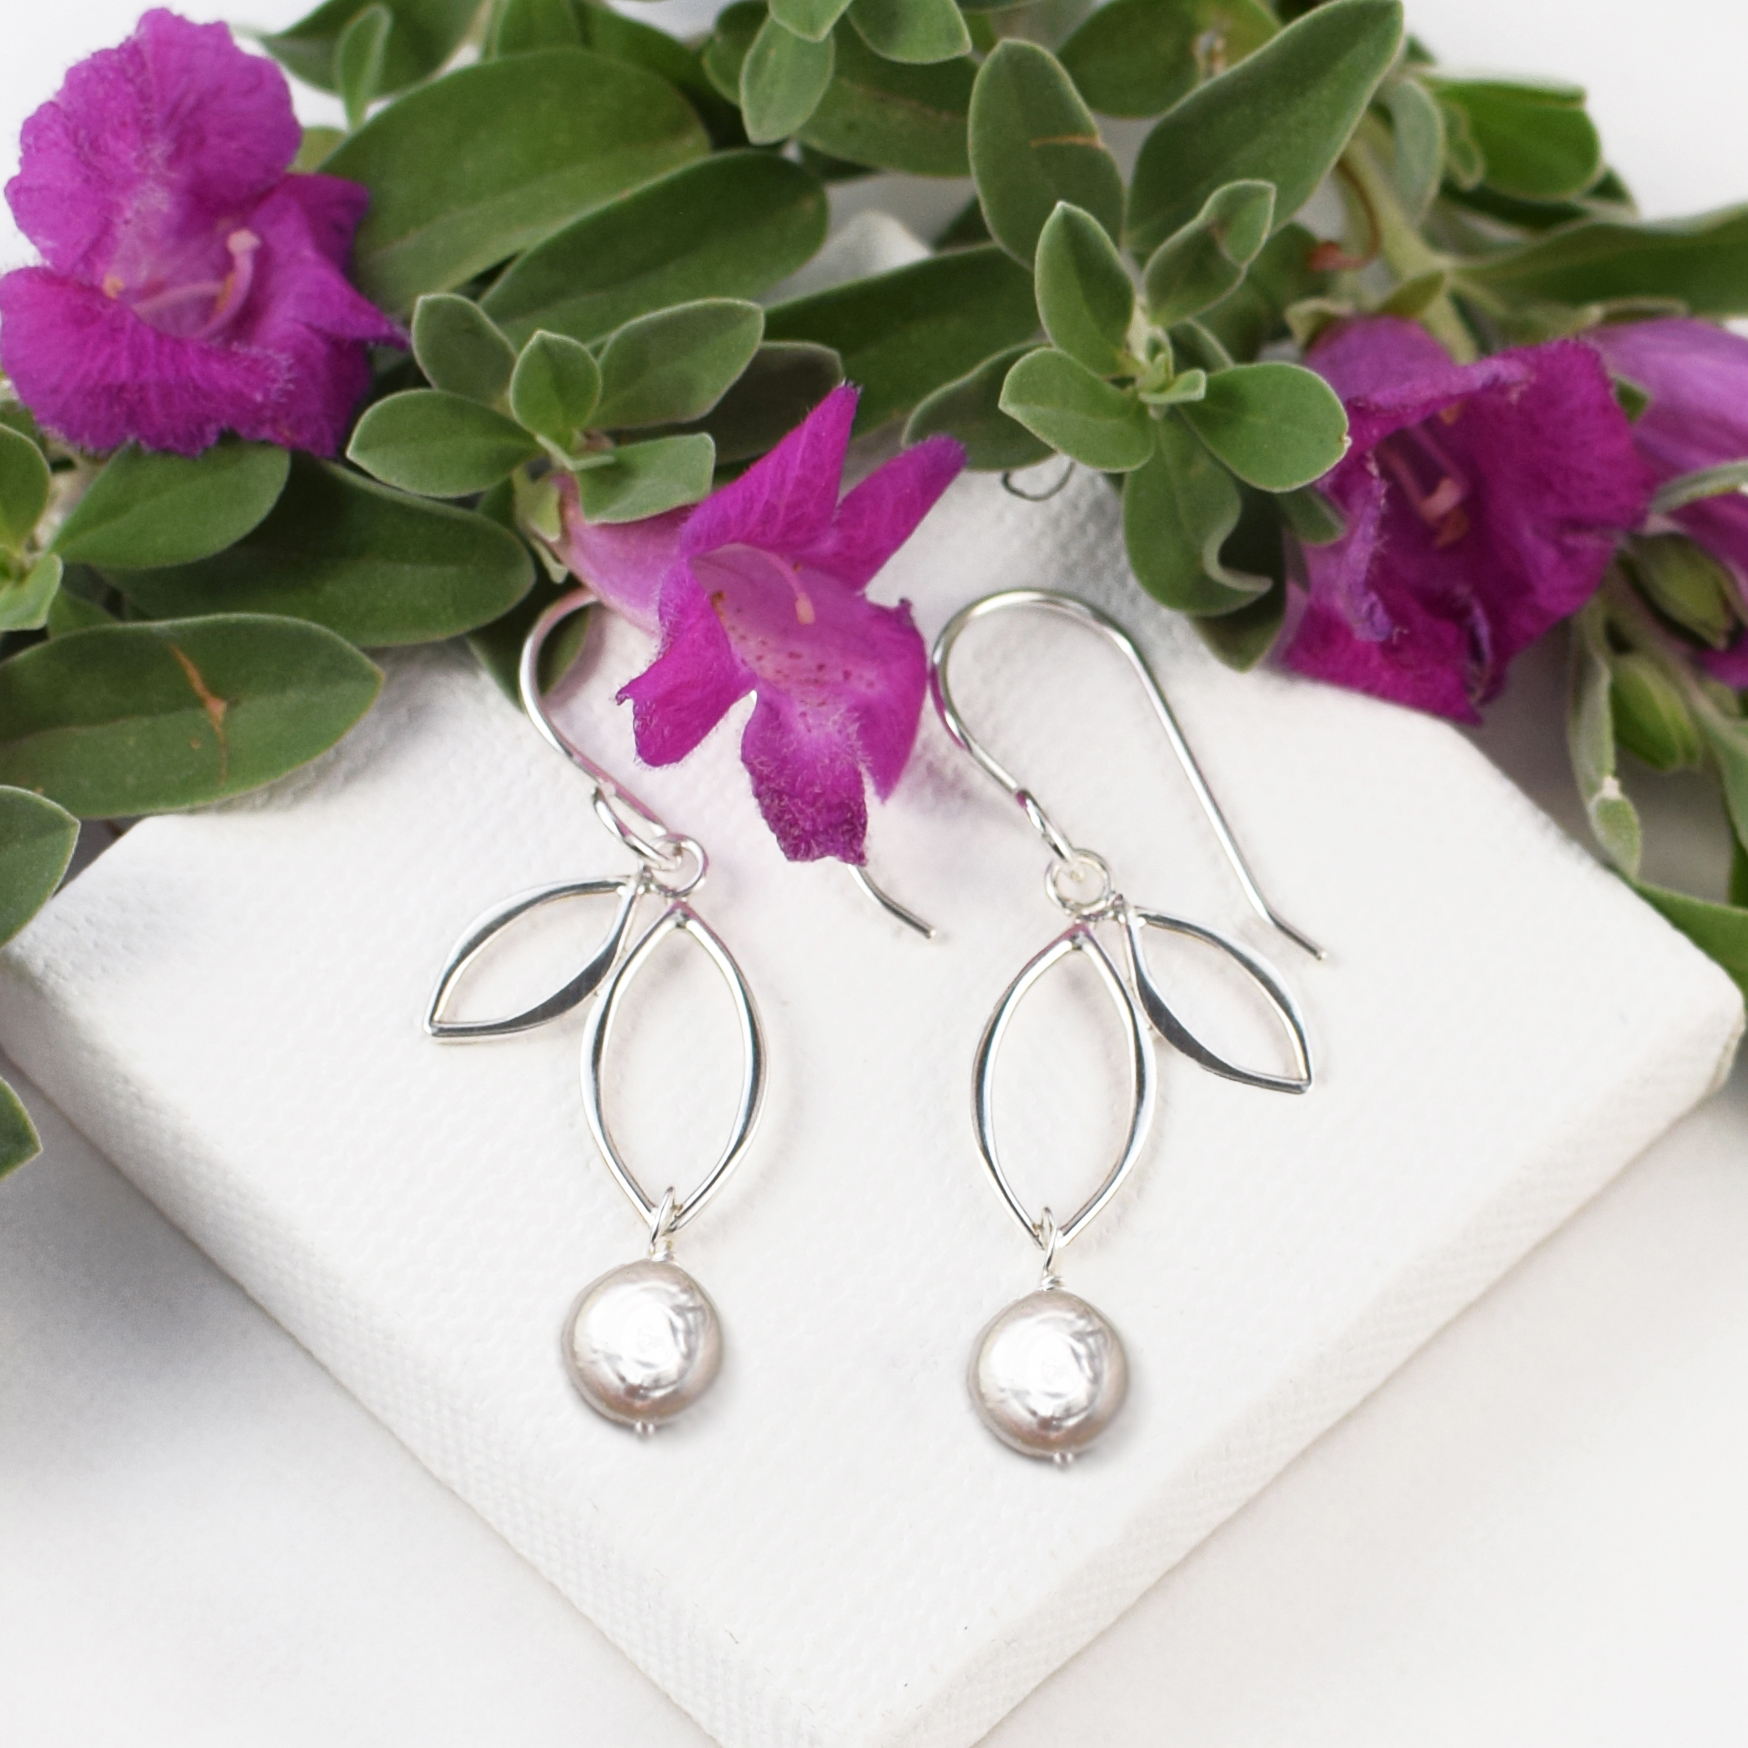 Silver Sprout Earrings with Gemstones - Lila Clare Jewelry